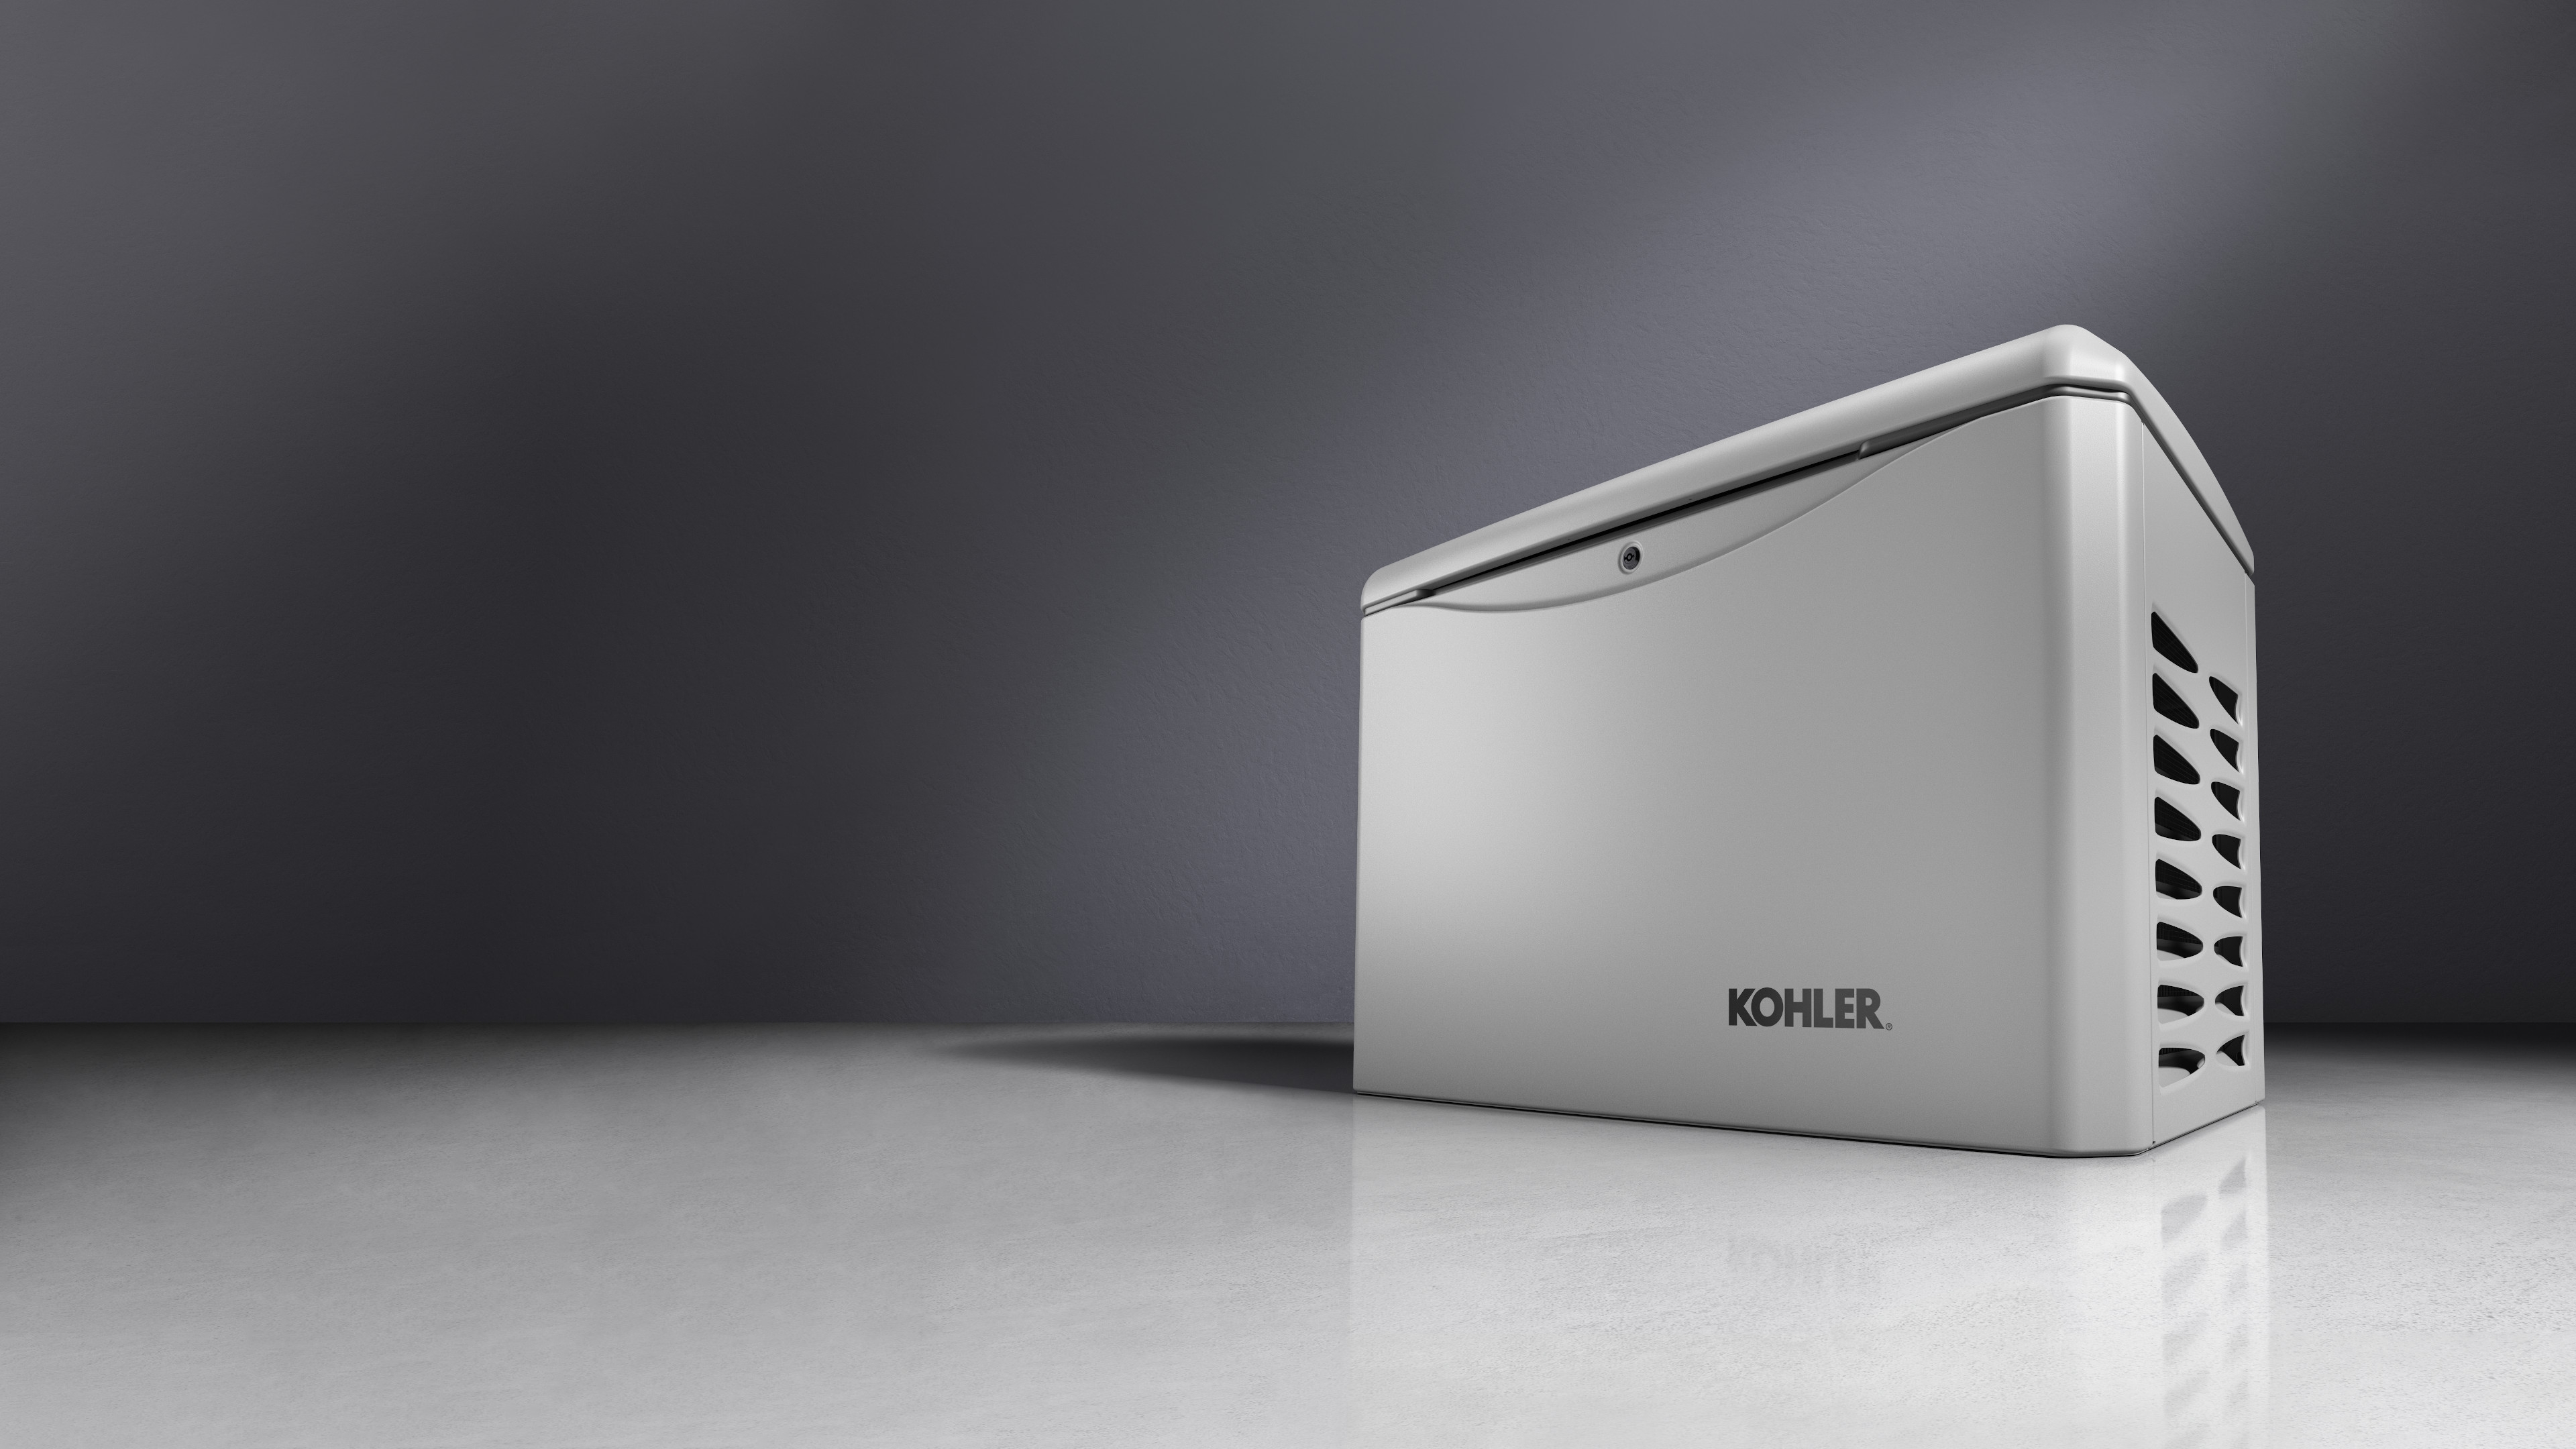 Dover Gray color Kohler residential generator with ventilated side panels, showcased against a gradient gray background.